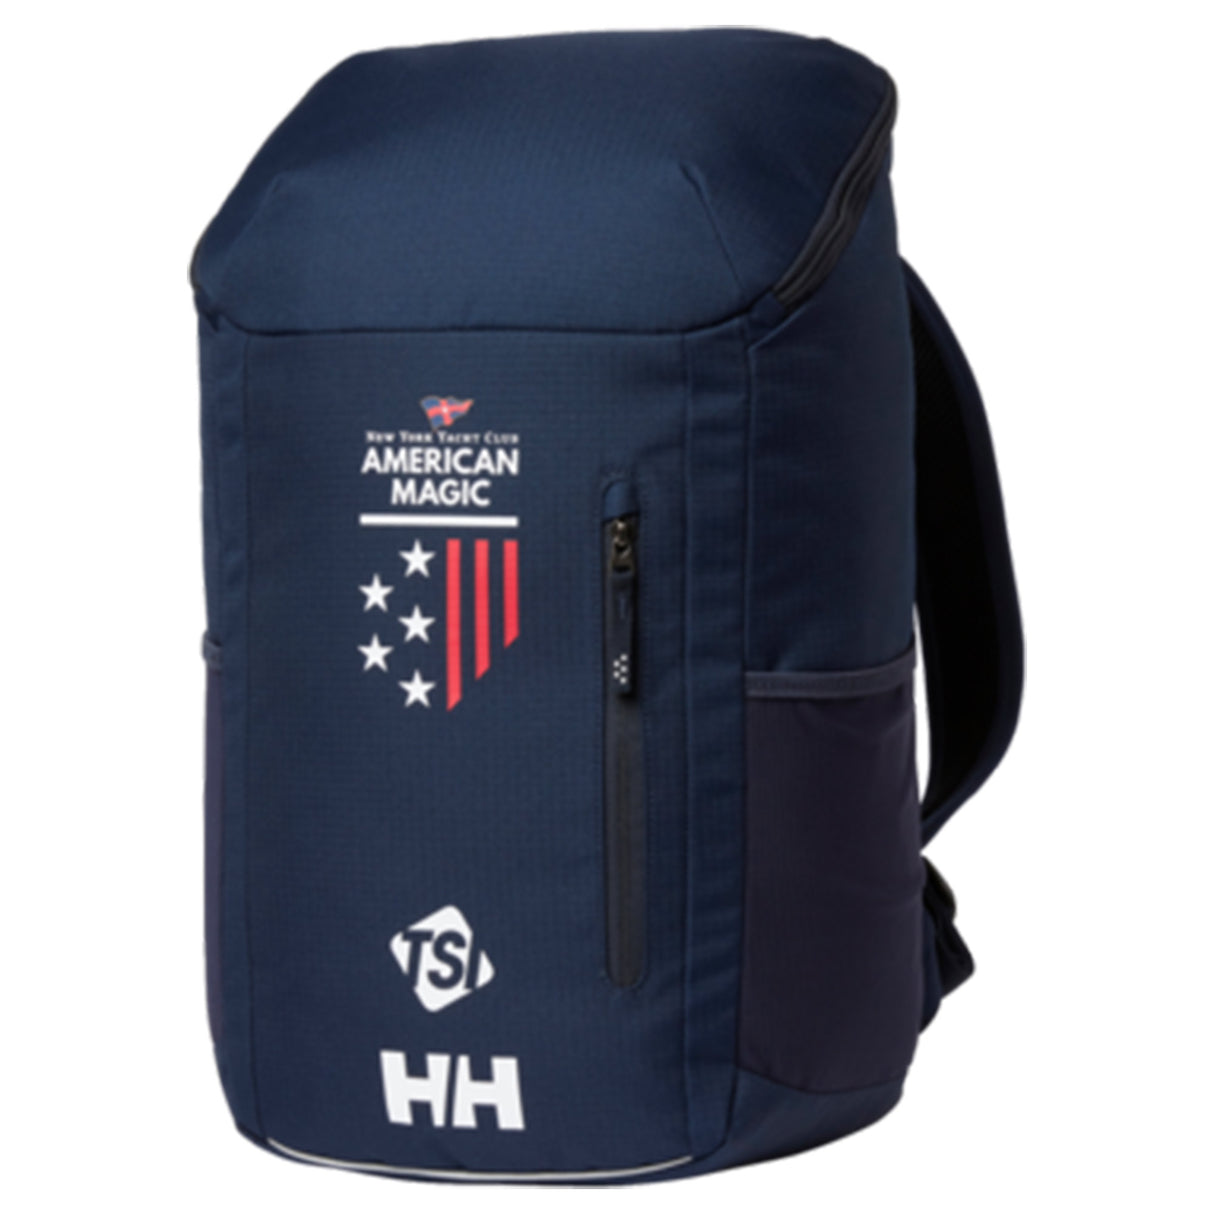 Helly Hansen American Magic Supporter Backpack - 25L